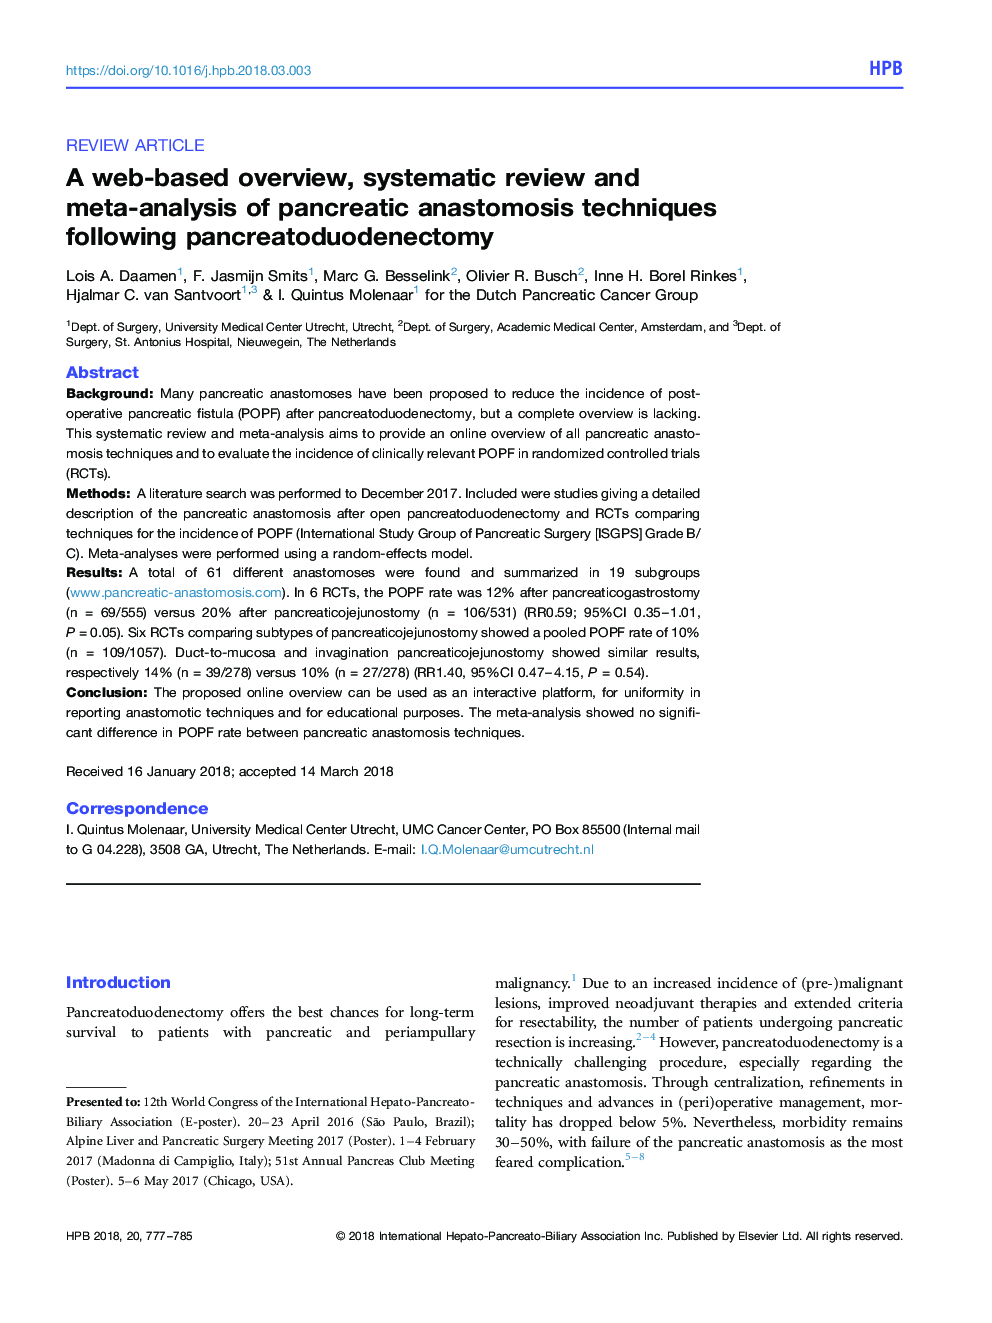 A web-based overview, systematic review and meta-analysis of pancreatic anastomosis techniques following pancreatoduodenectomy